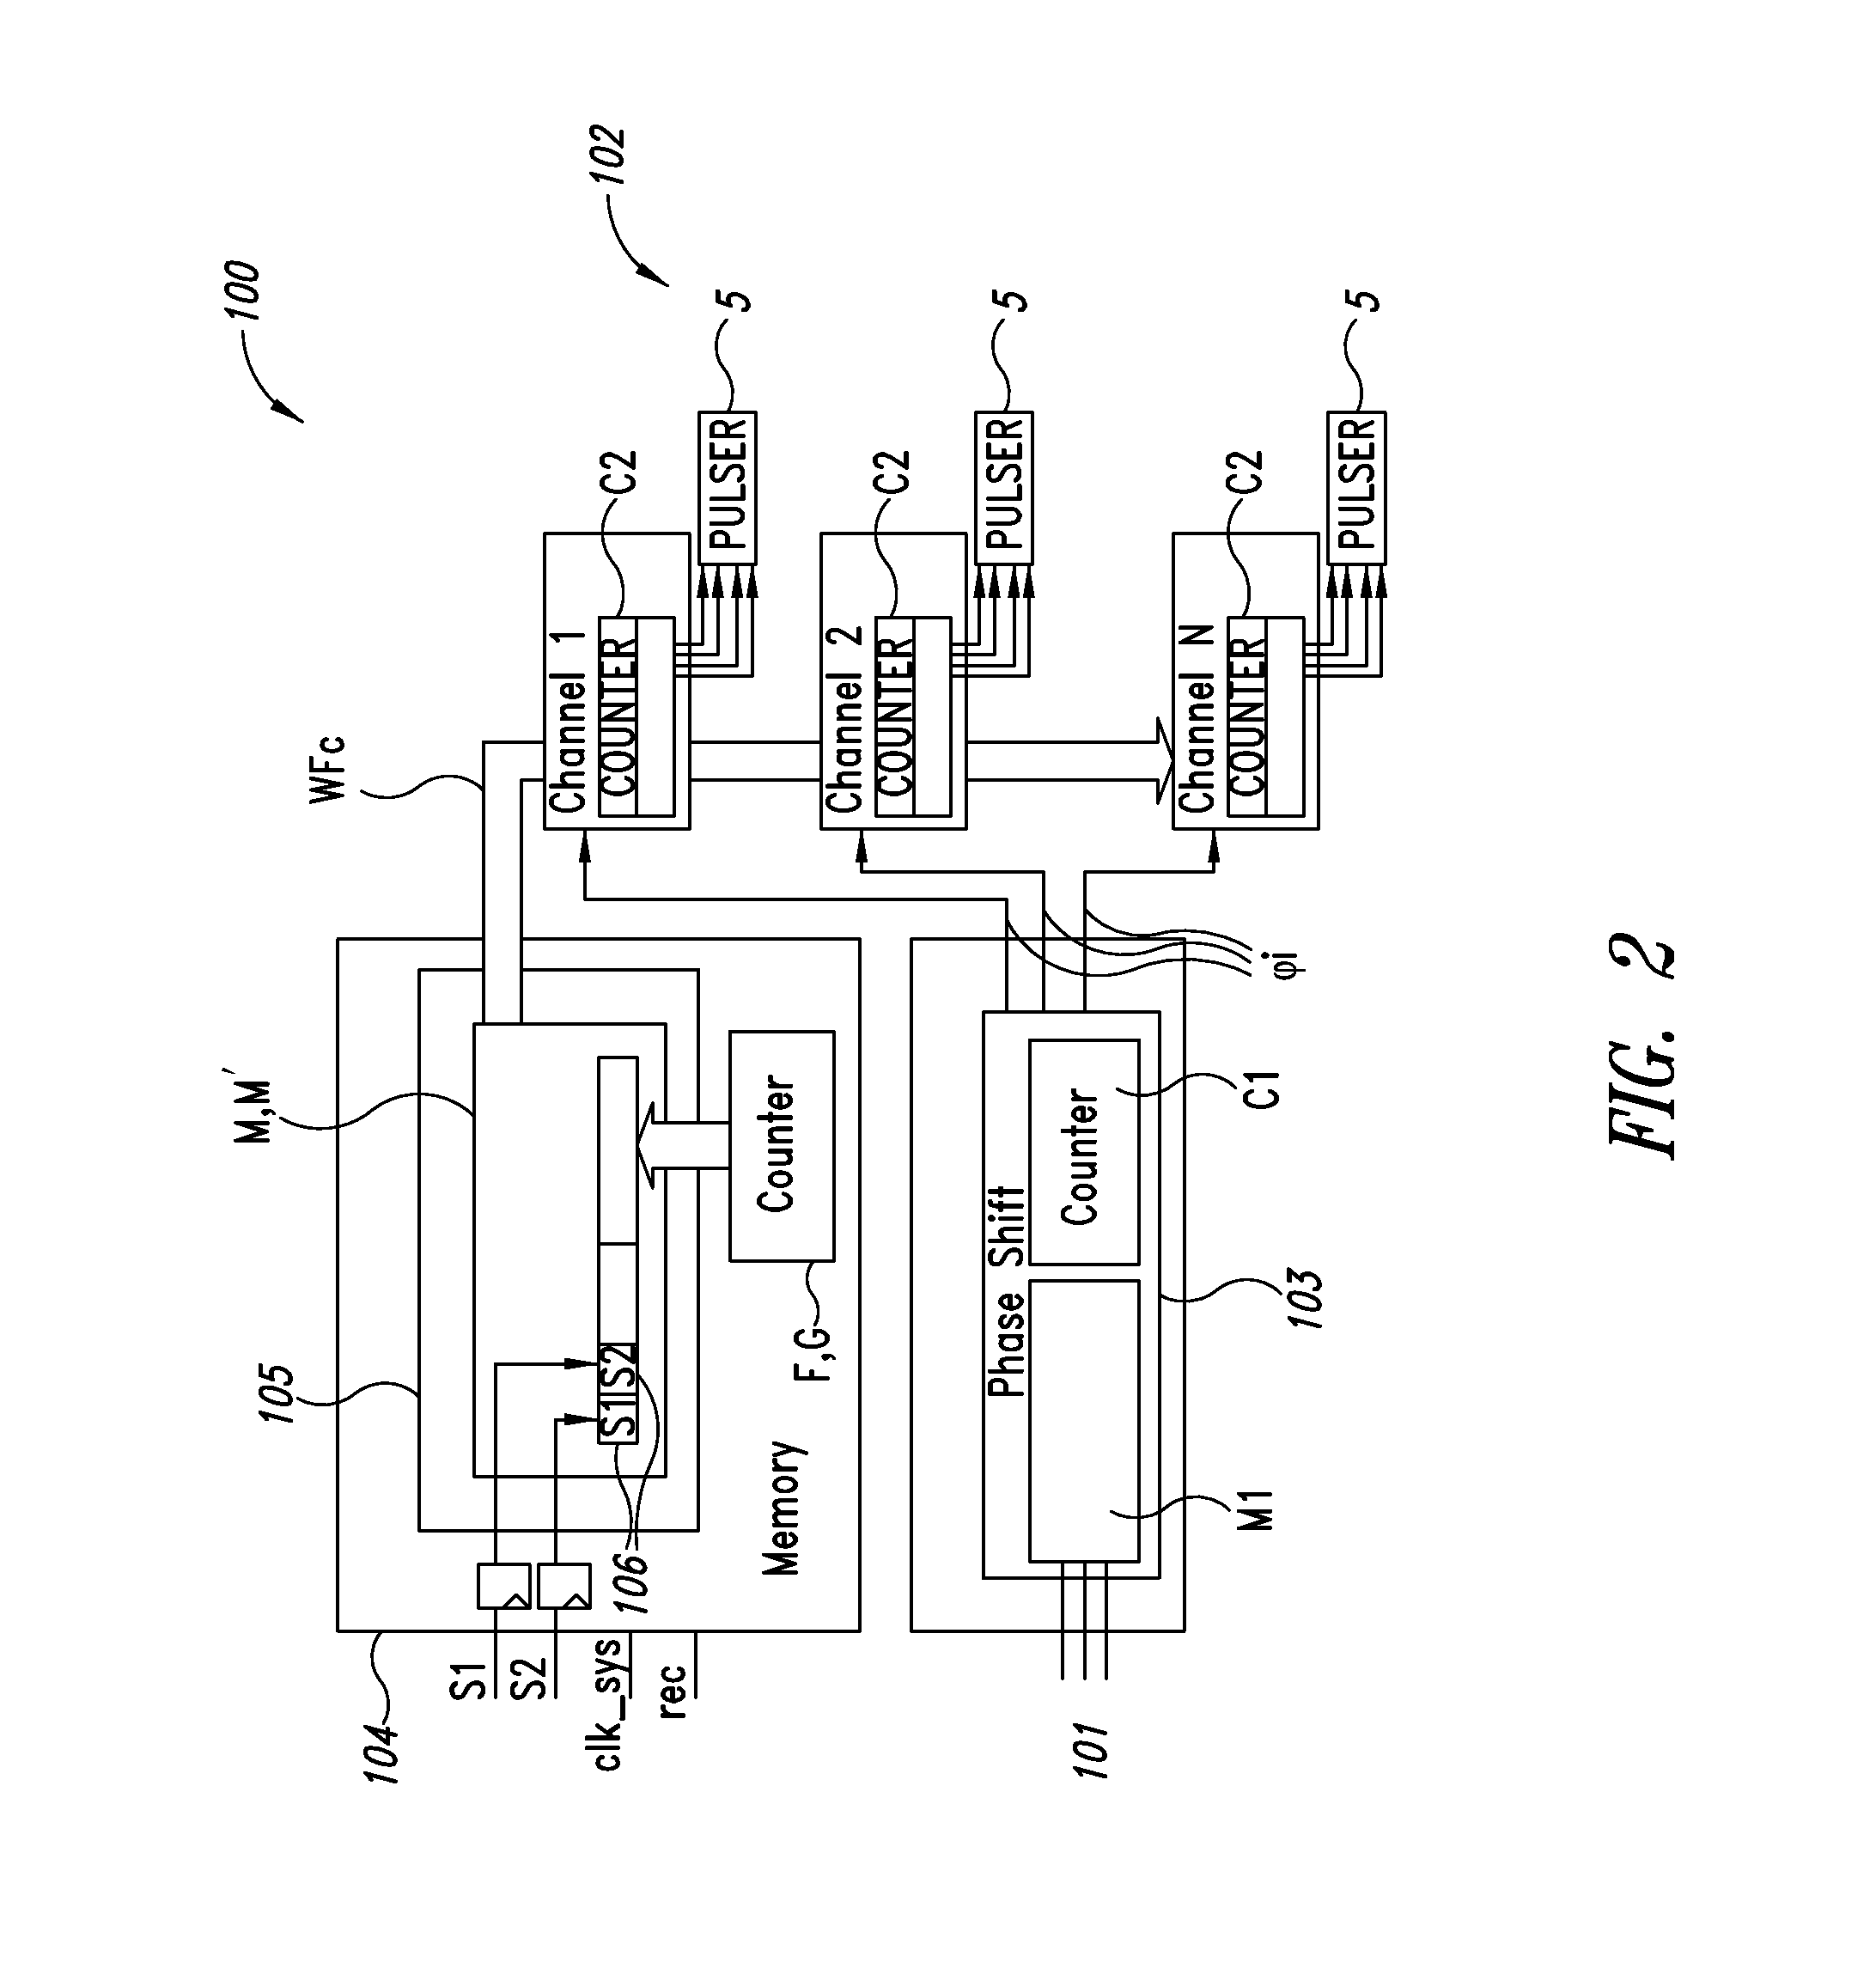 Method of setting a waveform signal in an ultrasound imaging apparatus and apparatus for setting an ultrasonic waveform signal using such method